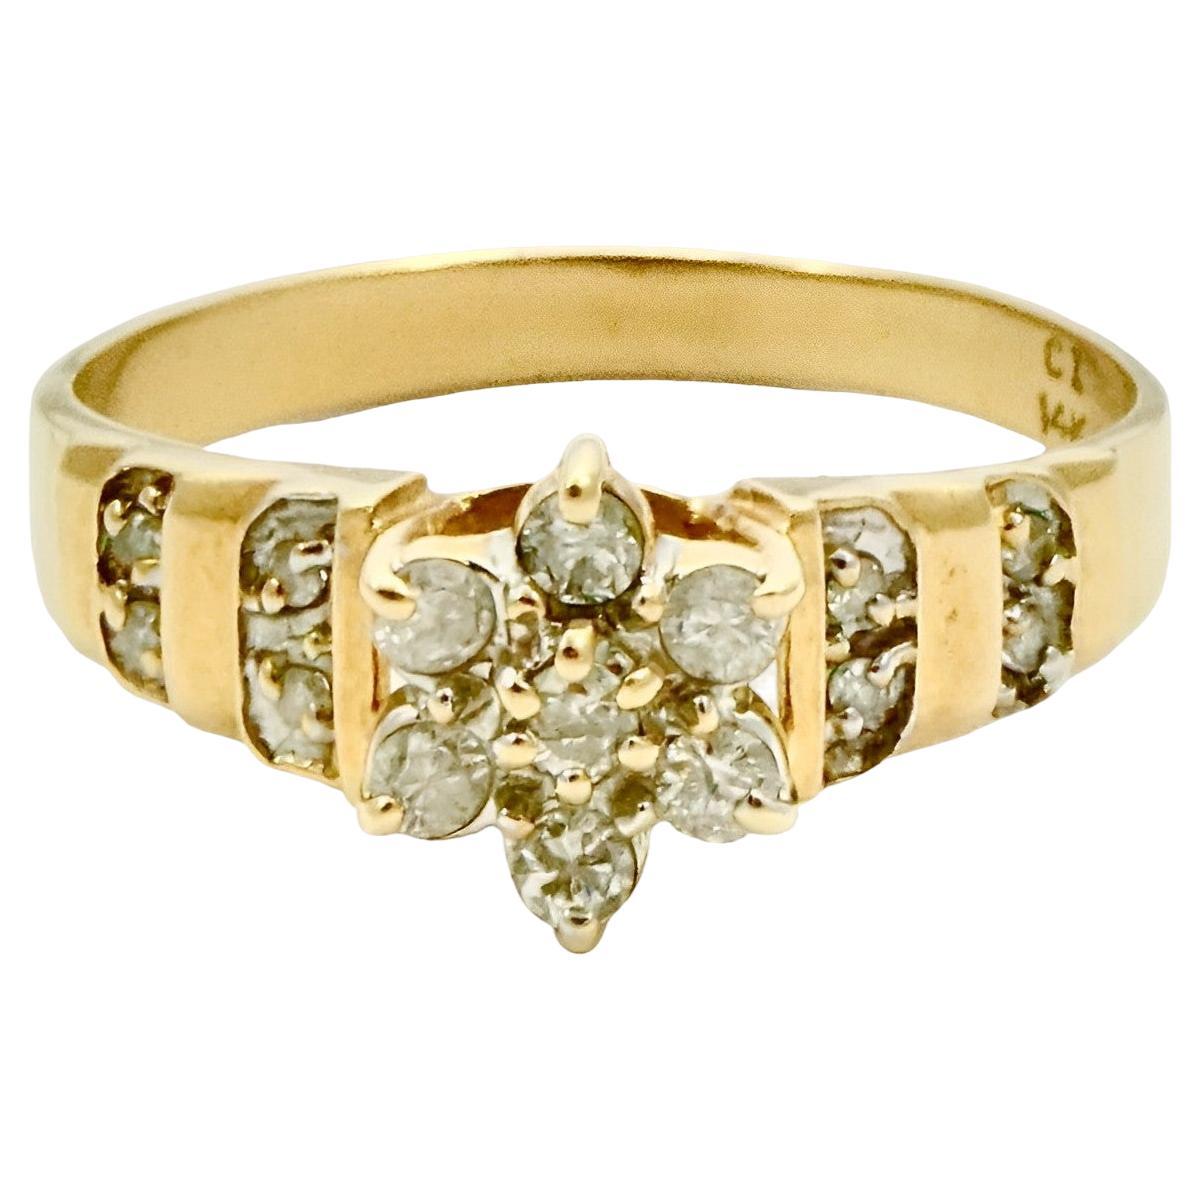 CI 14K Gold and Diamond Flower Cluster Ring with Diamond Accents circa 1960s For Sale